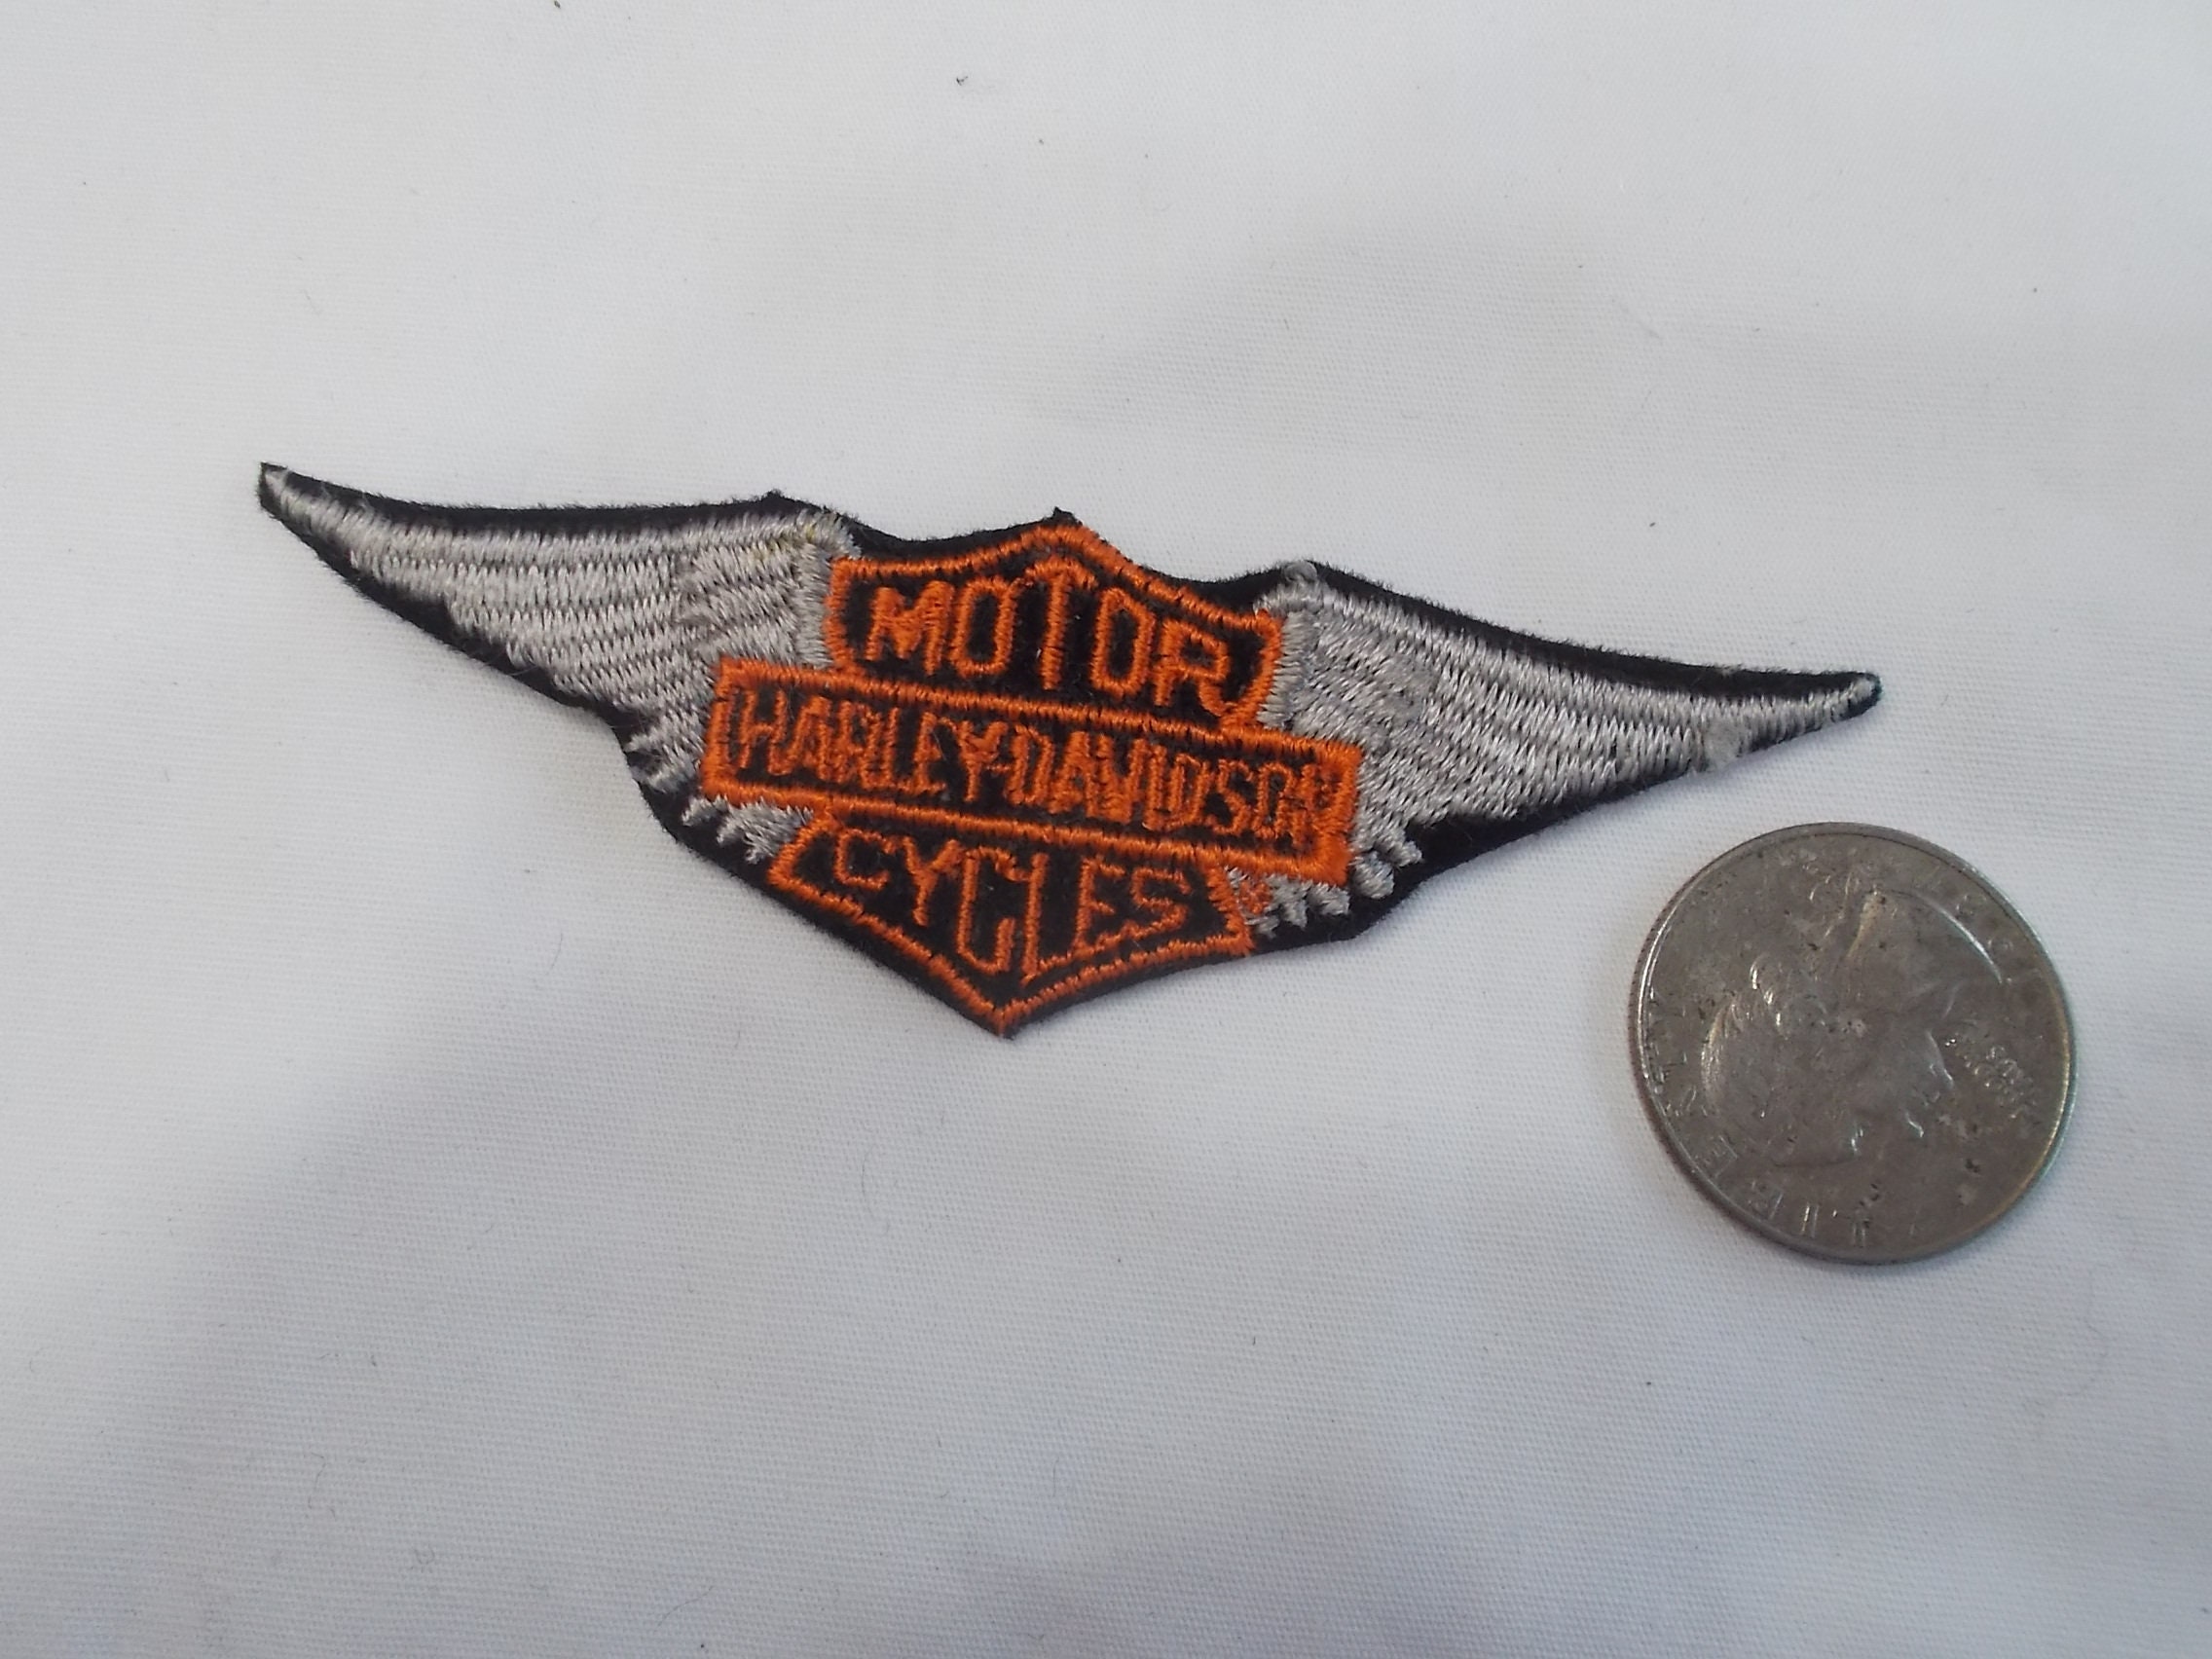 Harley-Davidson Motorcycles Silver Wing Authentic Vintage Patch